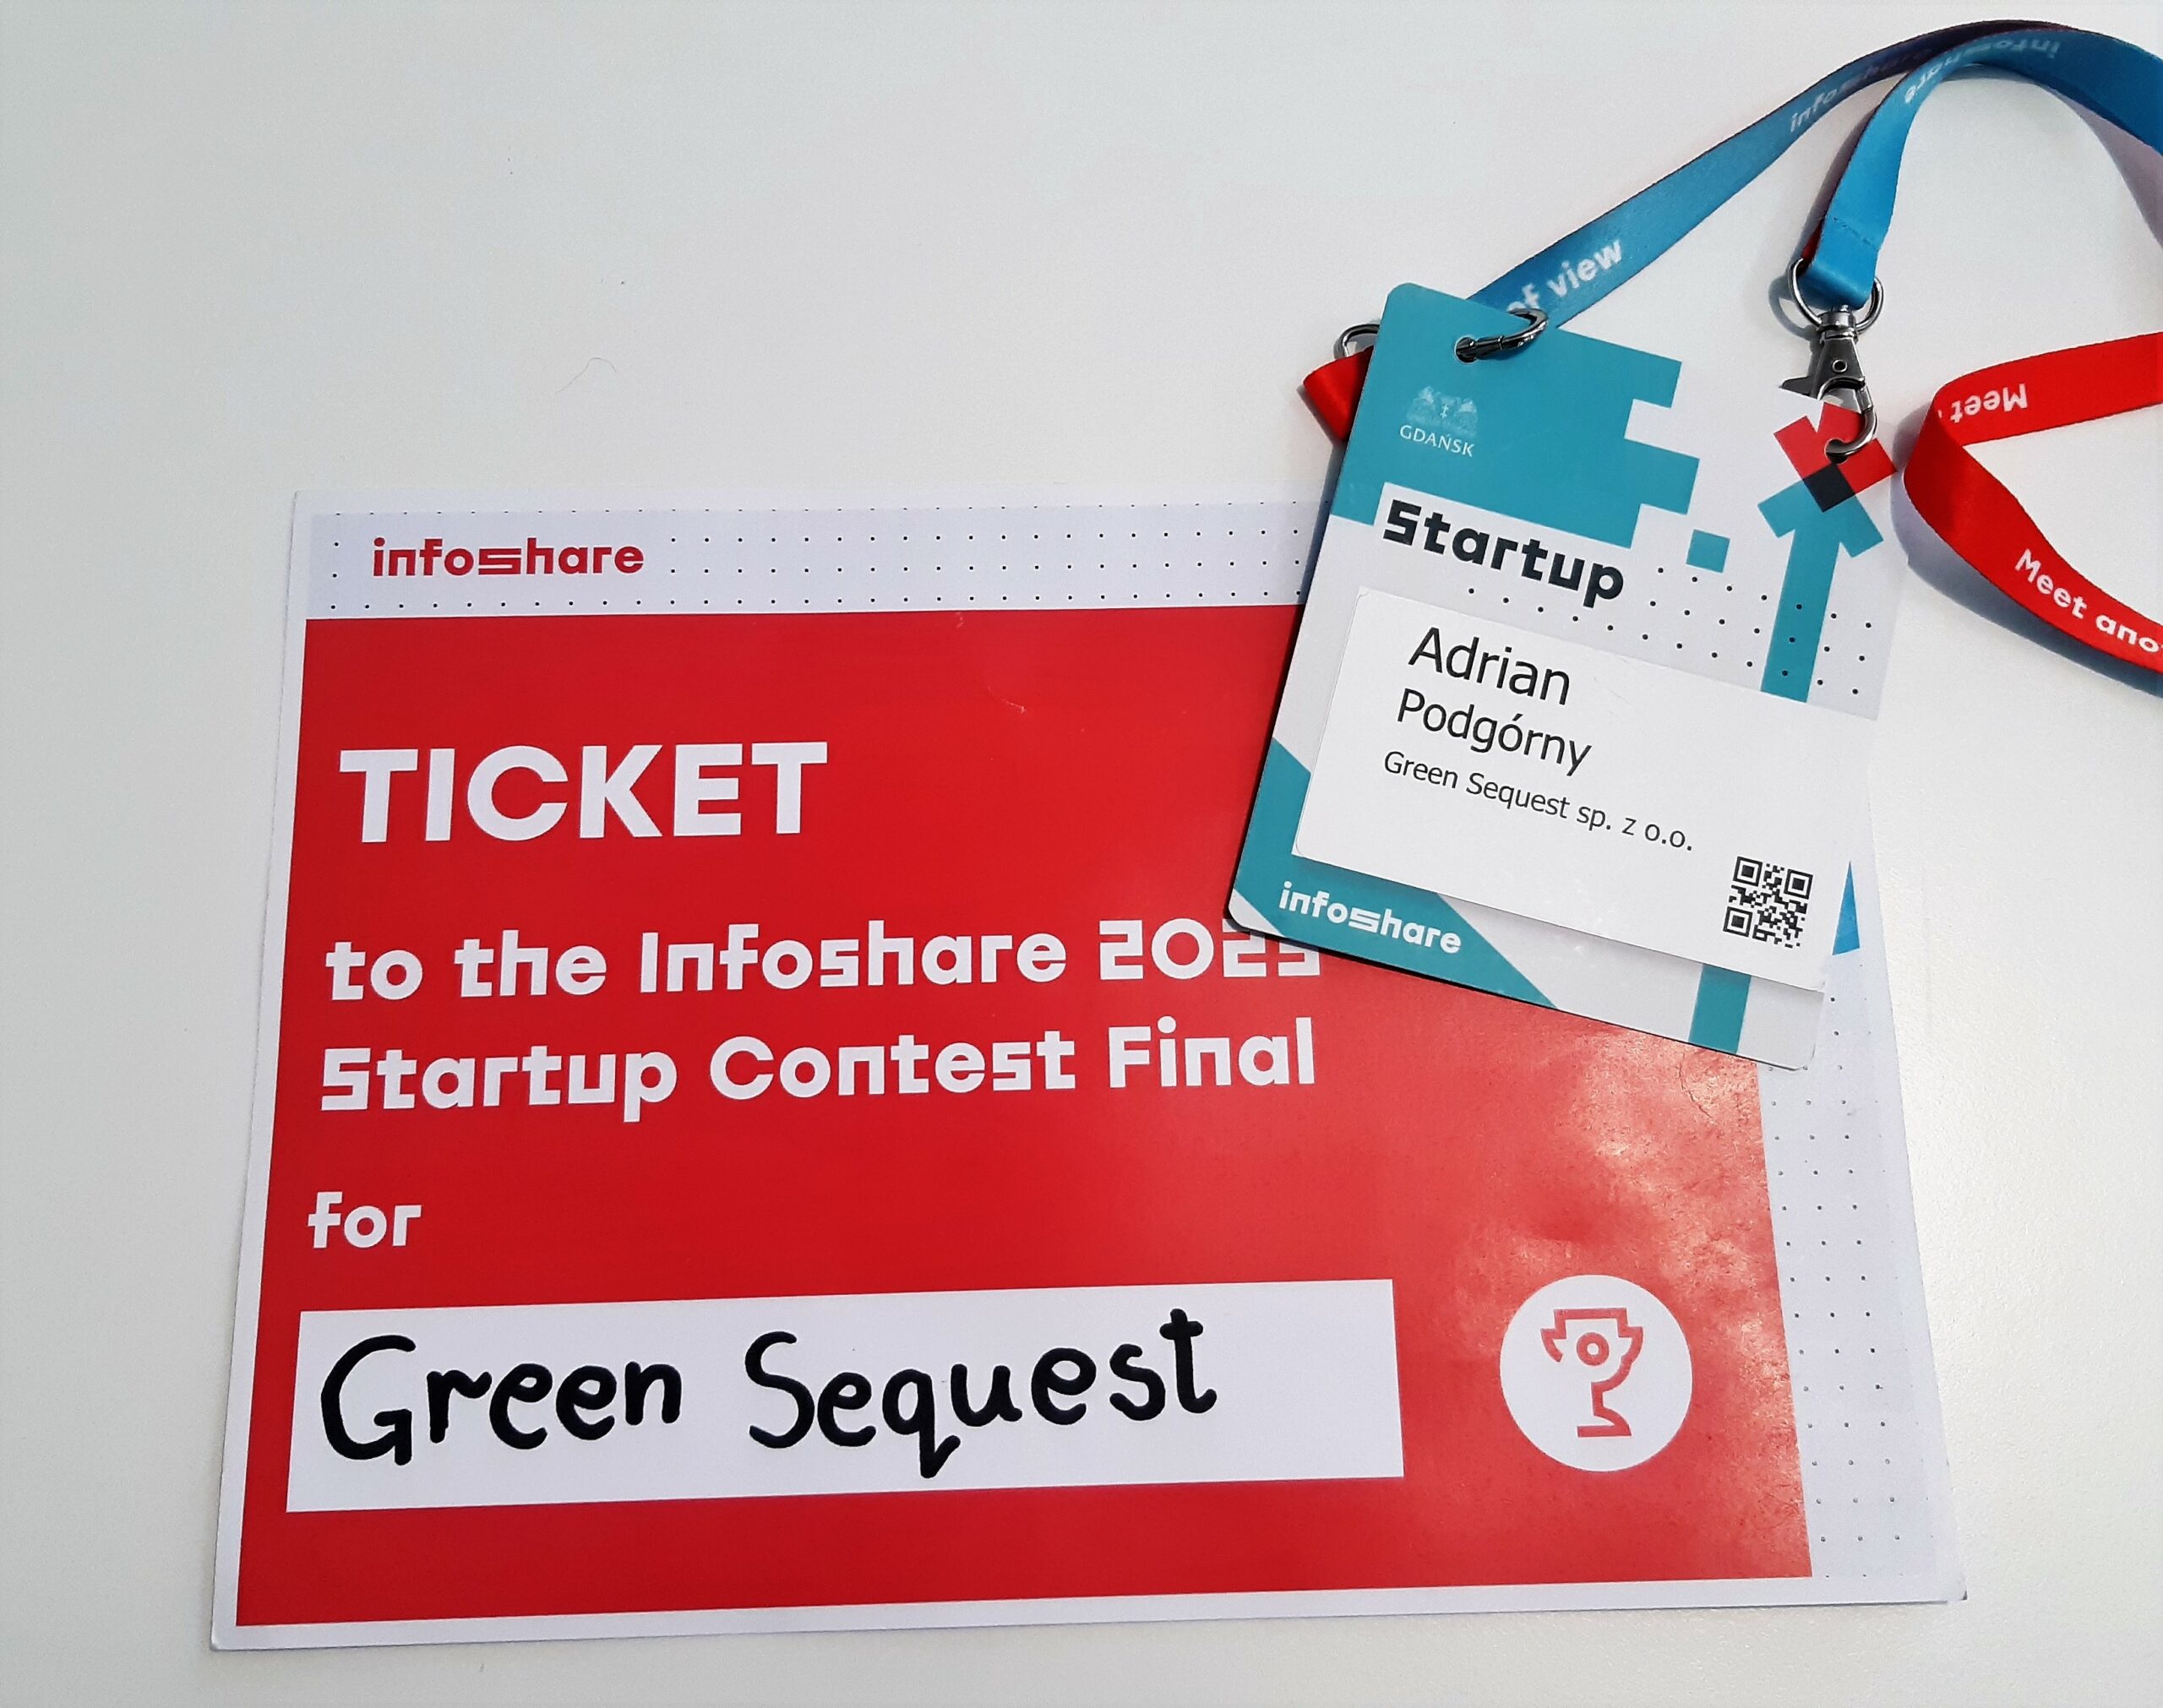 Green Sequest among the top 5 startups in the Infoshare Startup Contest